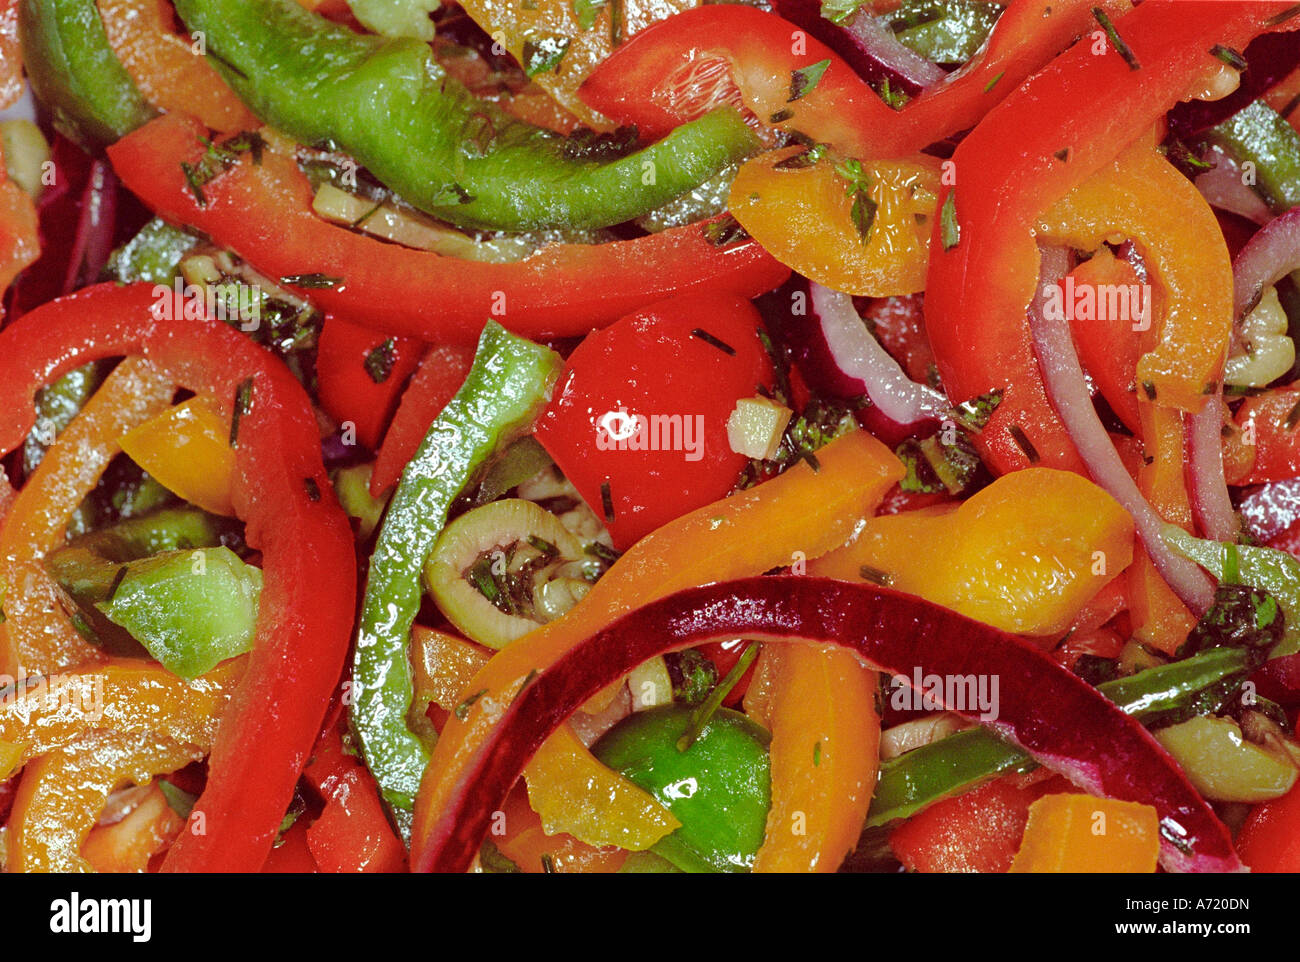 a salad with slices of peppers in a healthy salad Stock Photo